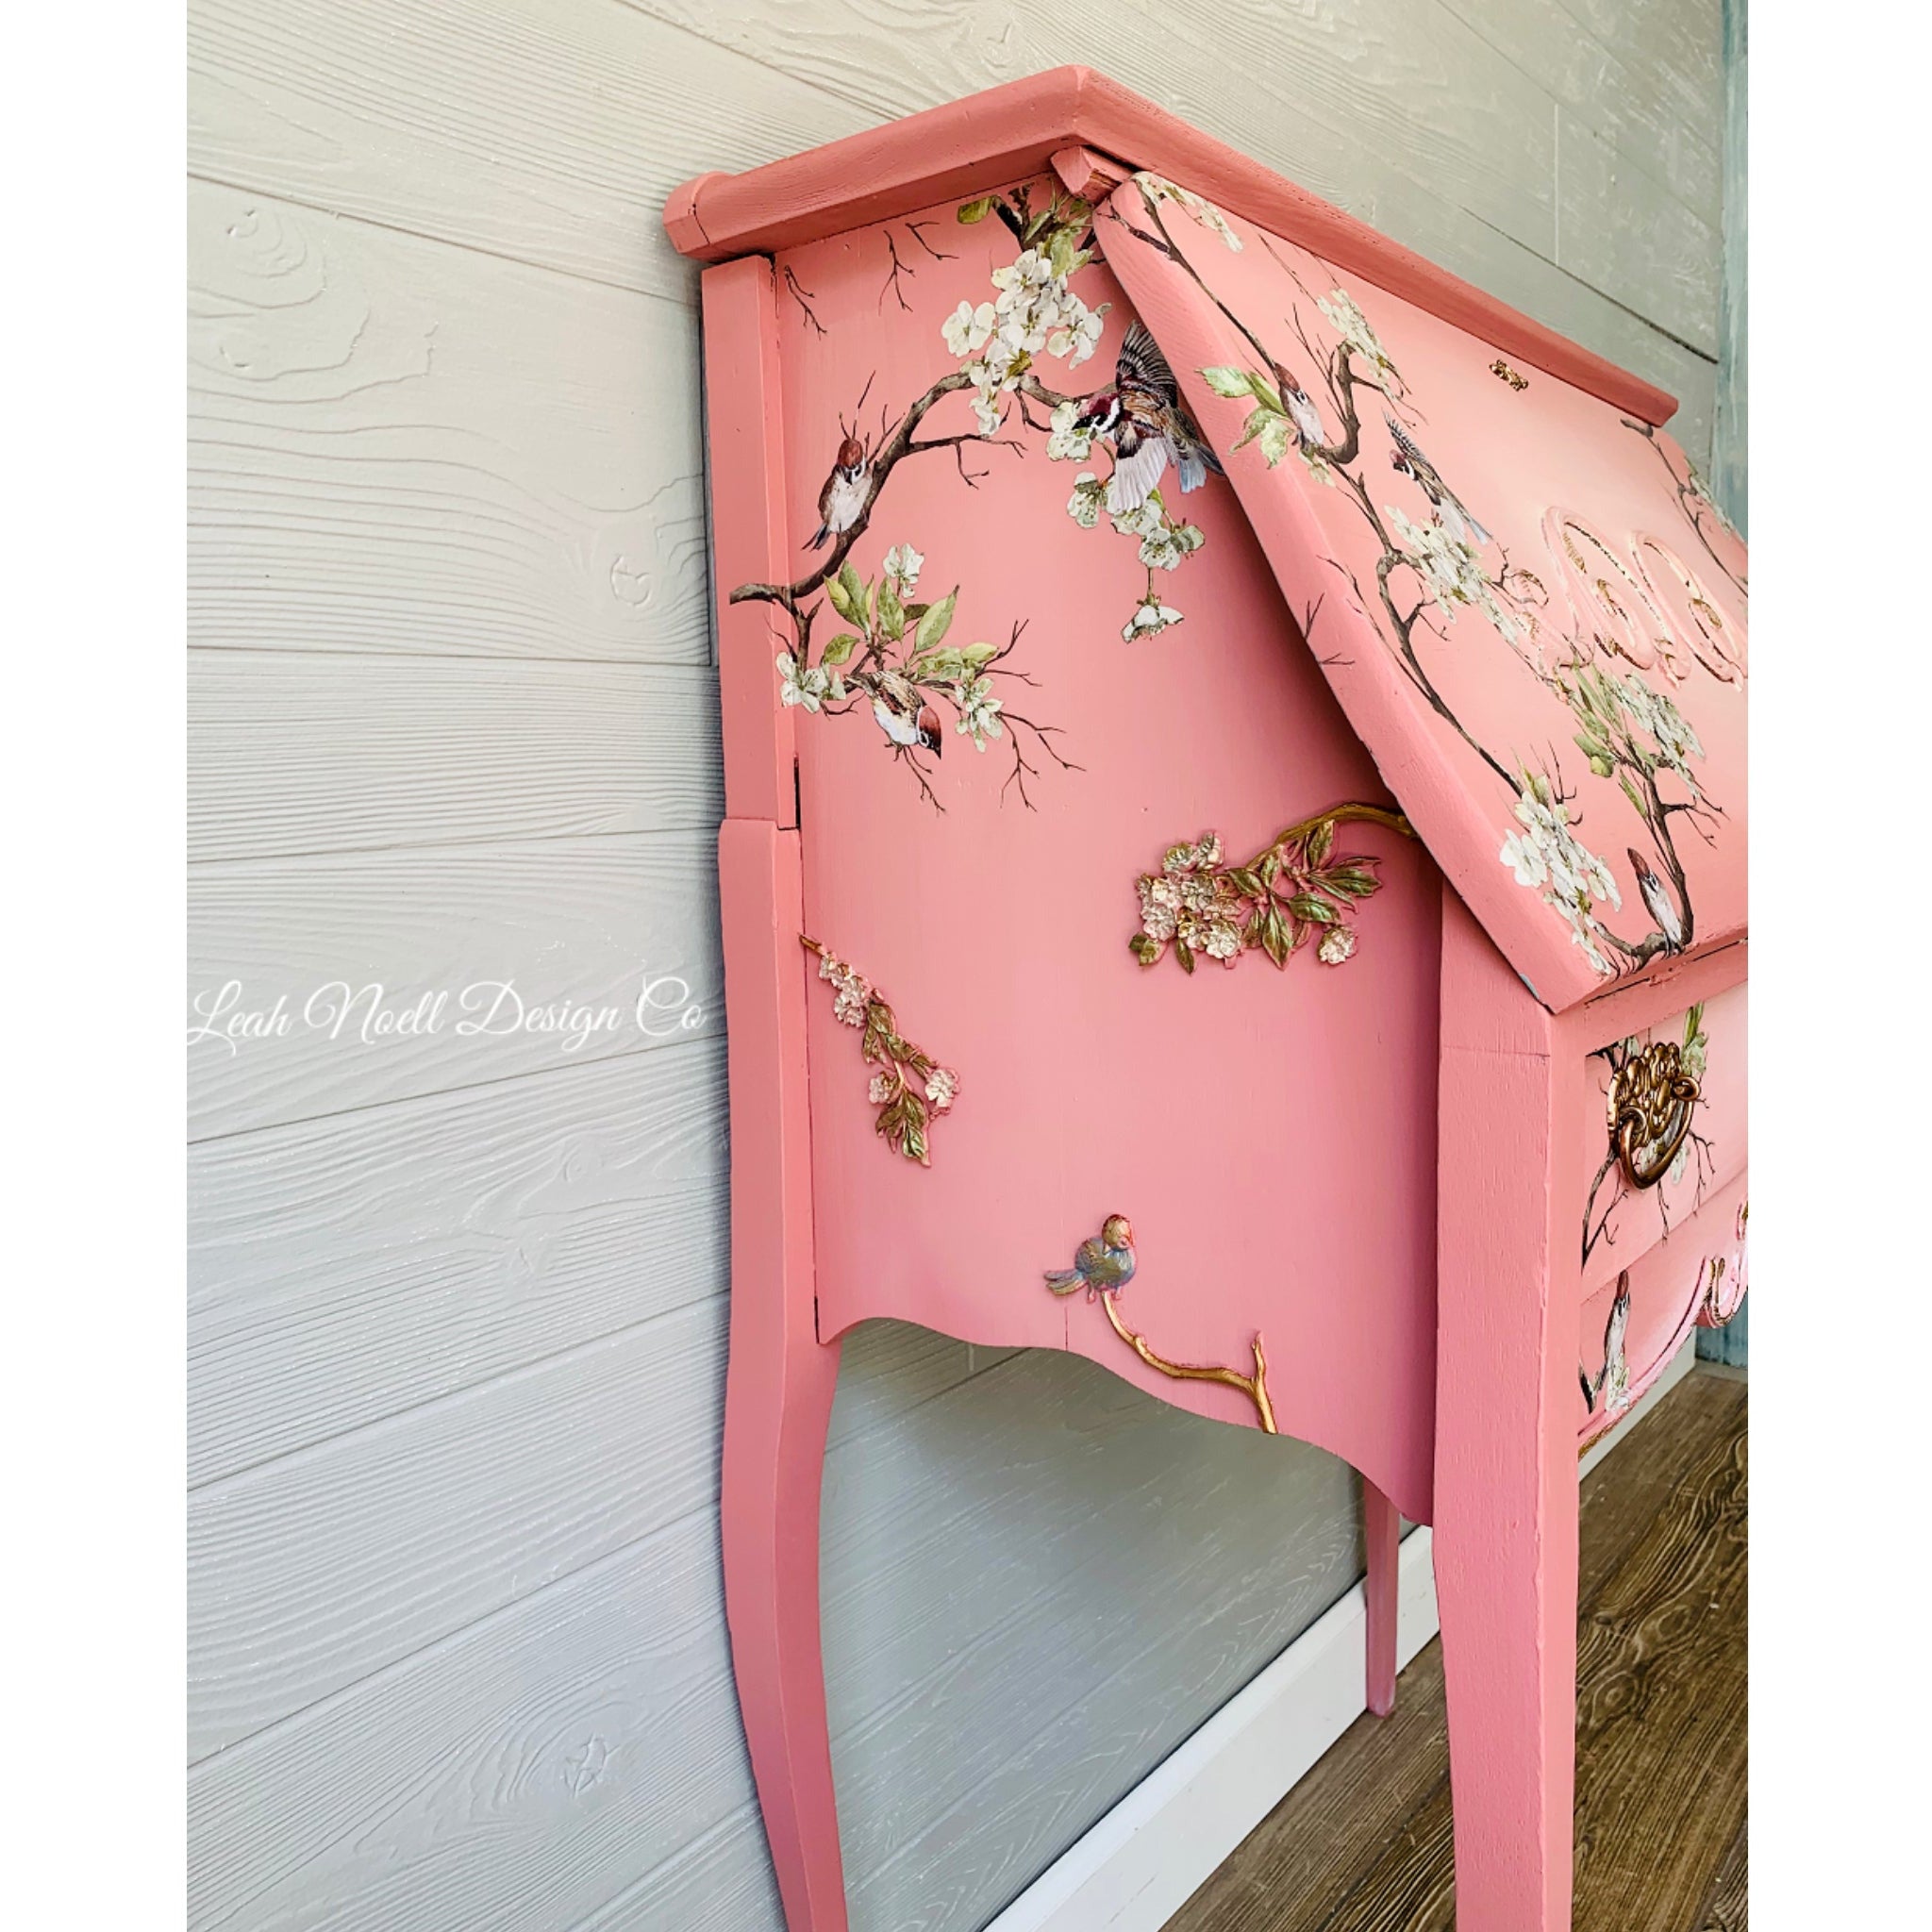 A vintage secretary desk refurbished by Leah Noell Design Co. is painted pink and features the Aviary silicone mould on it.